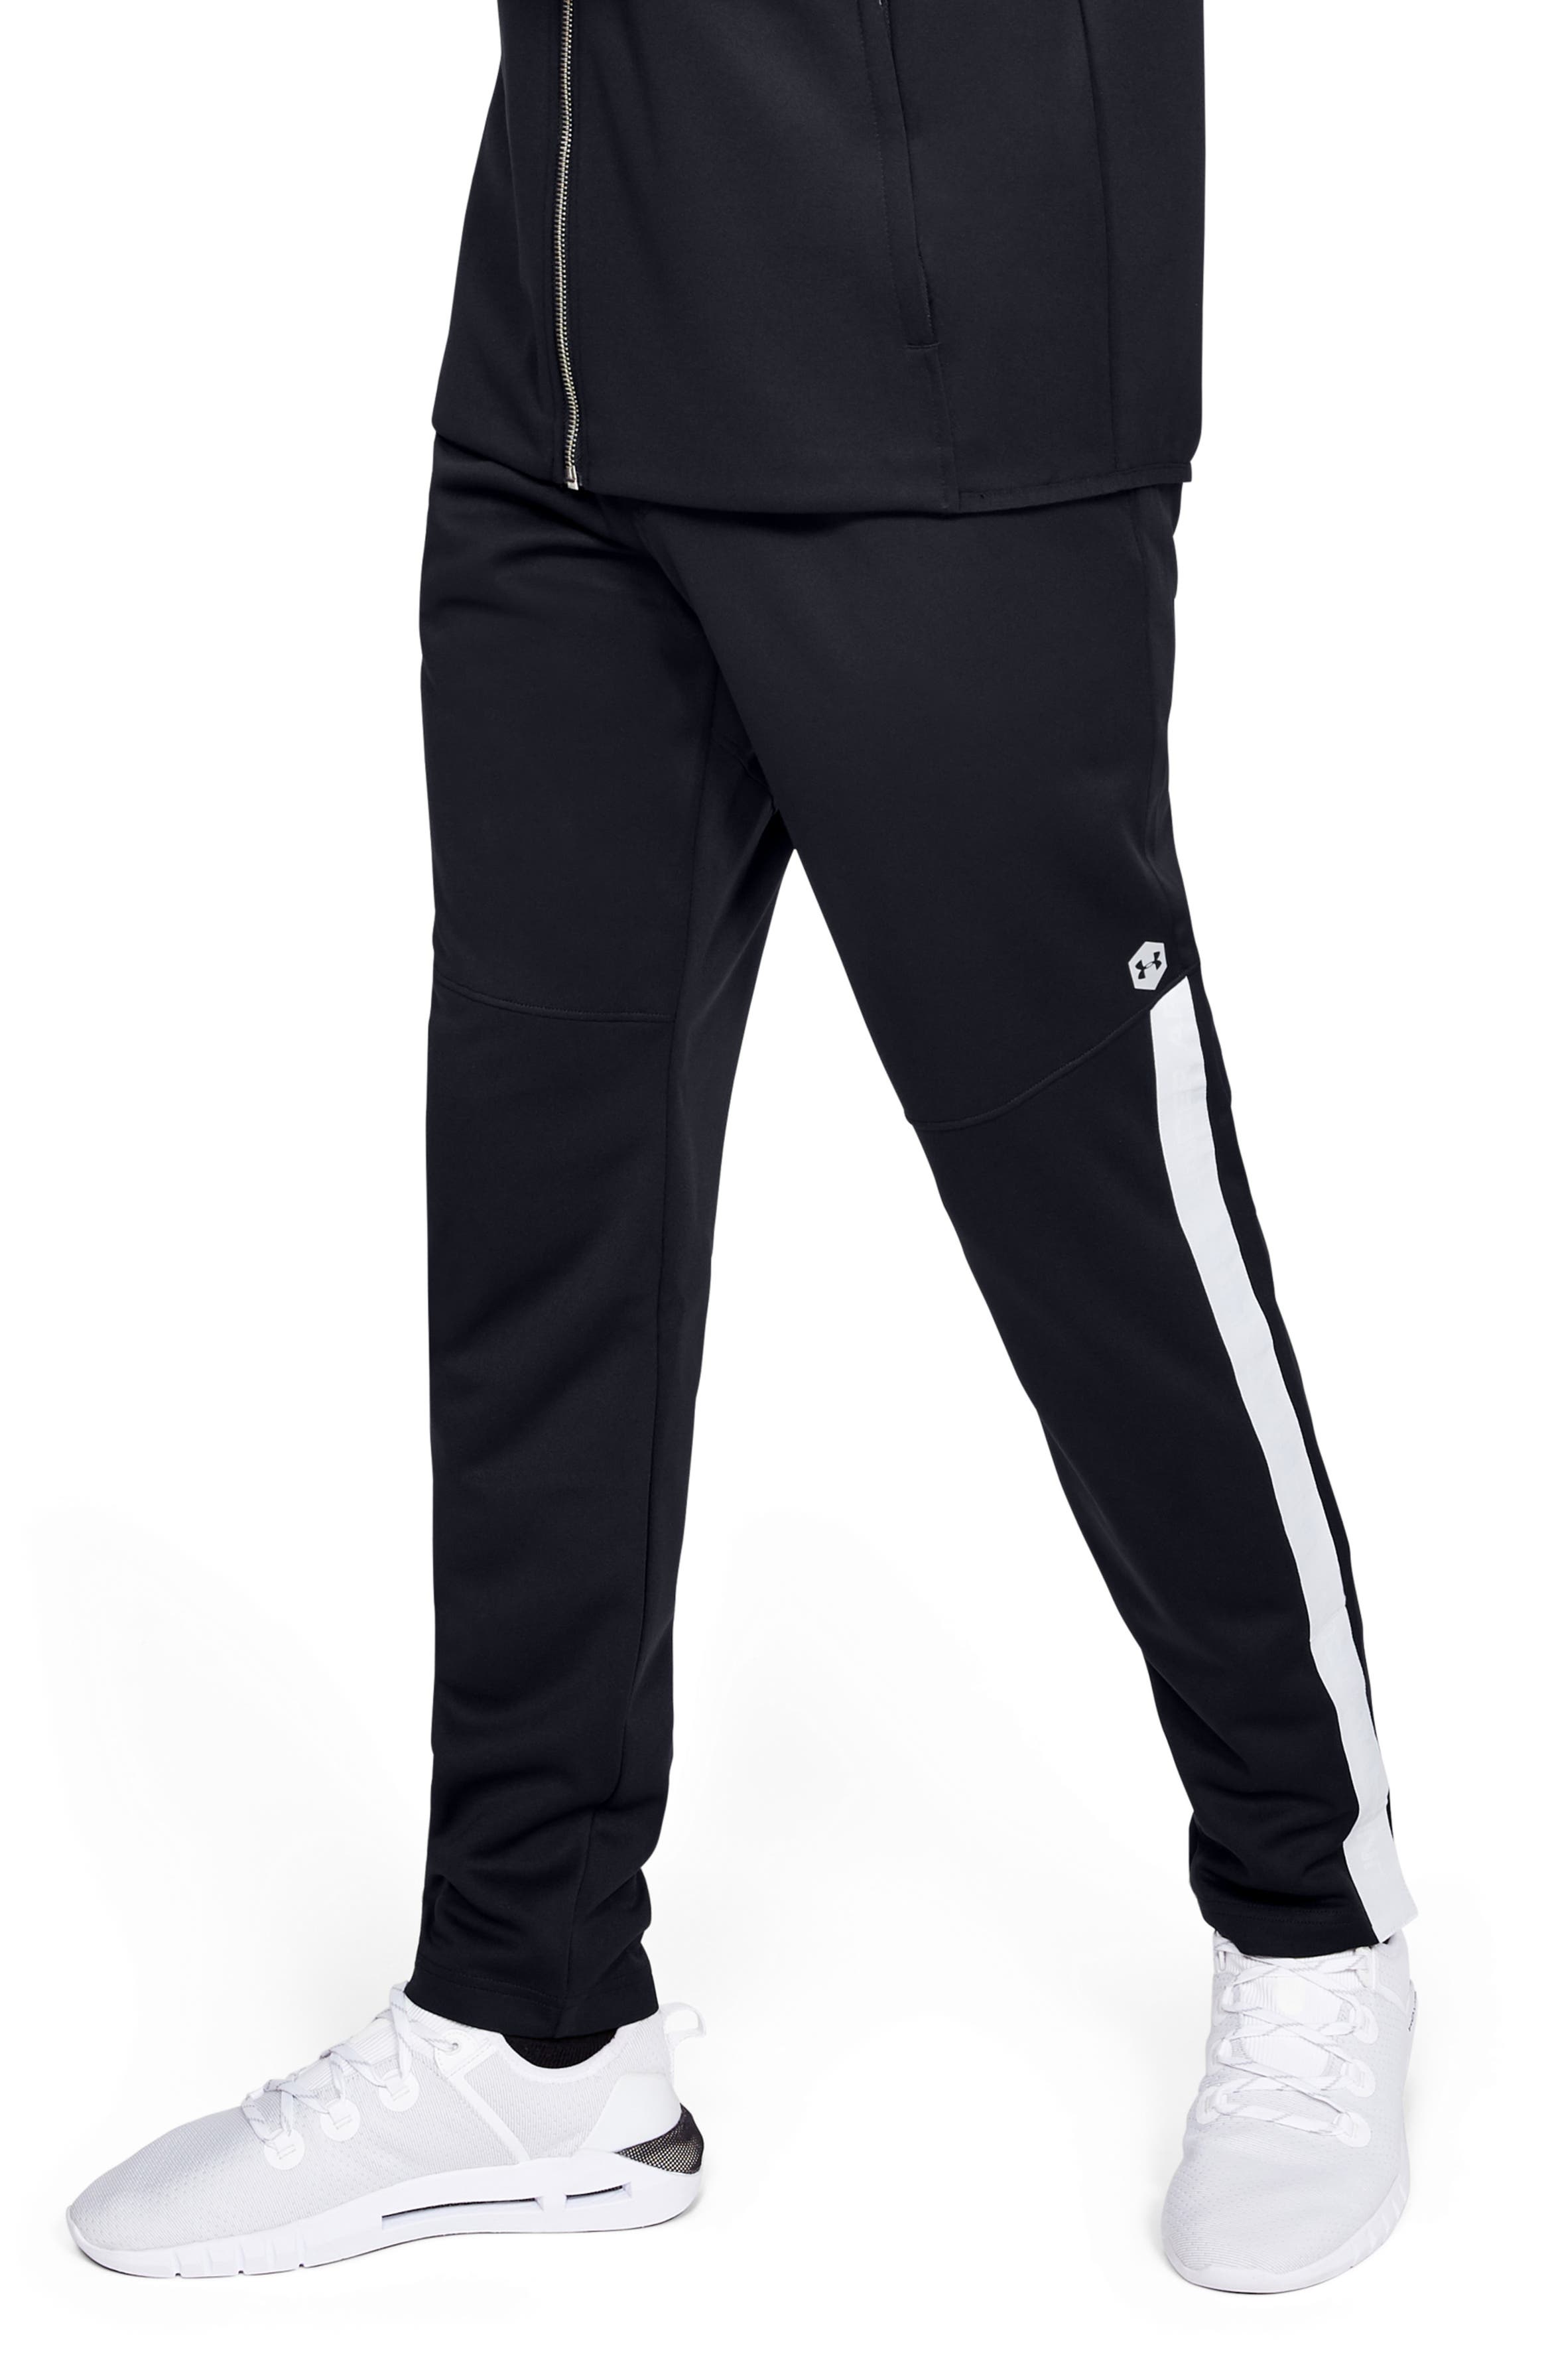 Under Armour Athlete Recovery Warm-Up Pants | Nordstrom